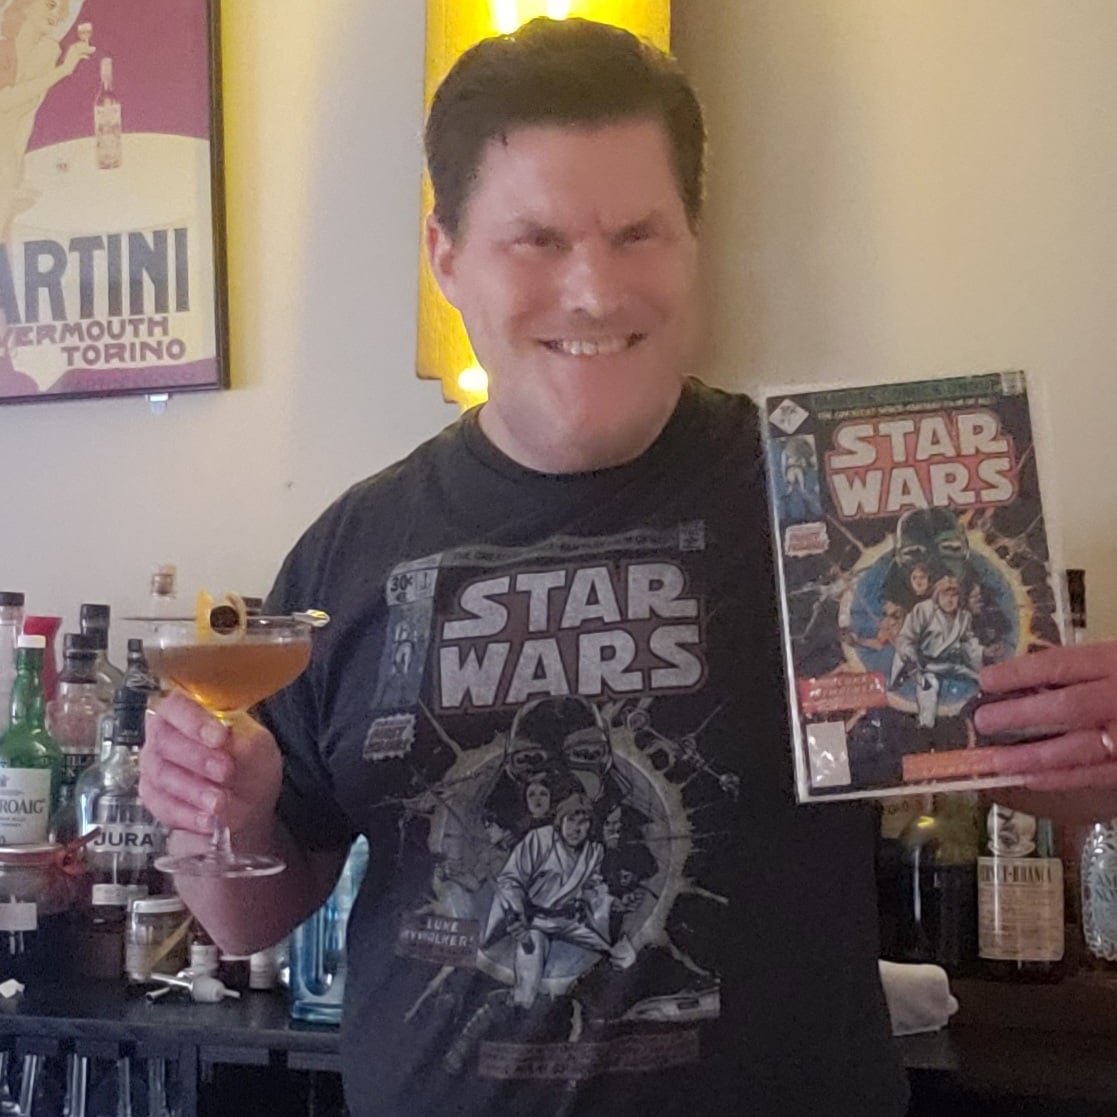 Happy May the 4th! Here's the first tweet I'll be making today sharing some cocktails I've made in the past to celebrate. 
May the force (and these drinks) be with you! 🍹✨ #StarWarsDay #CocktailRecipes #MayThe4th 
Recipes in the comments. 👇